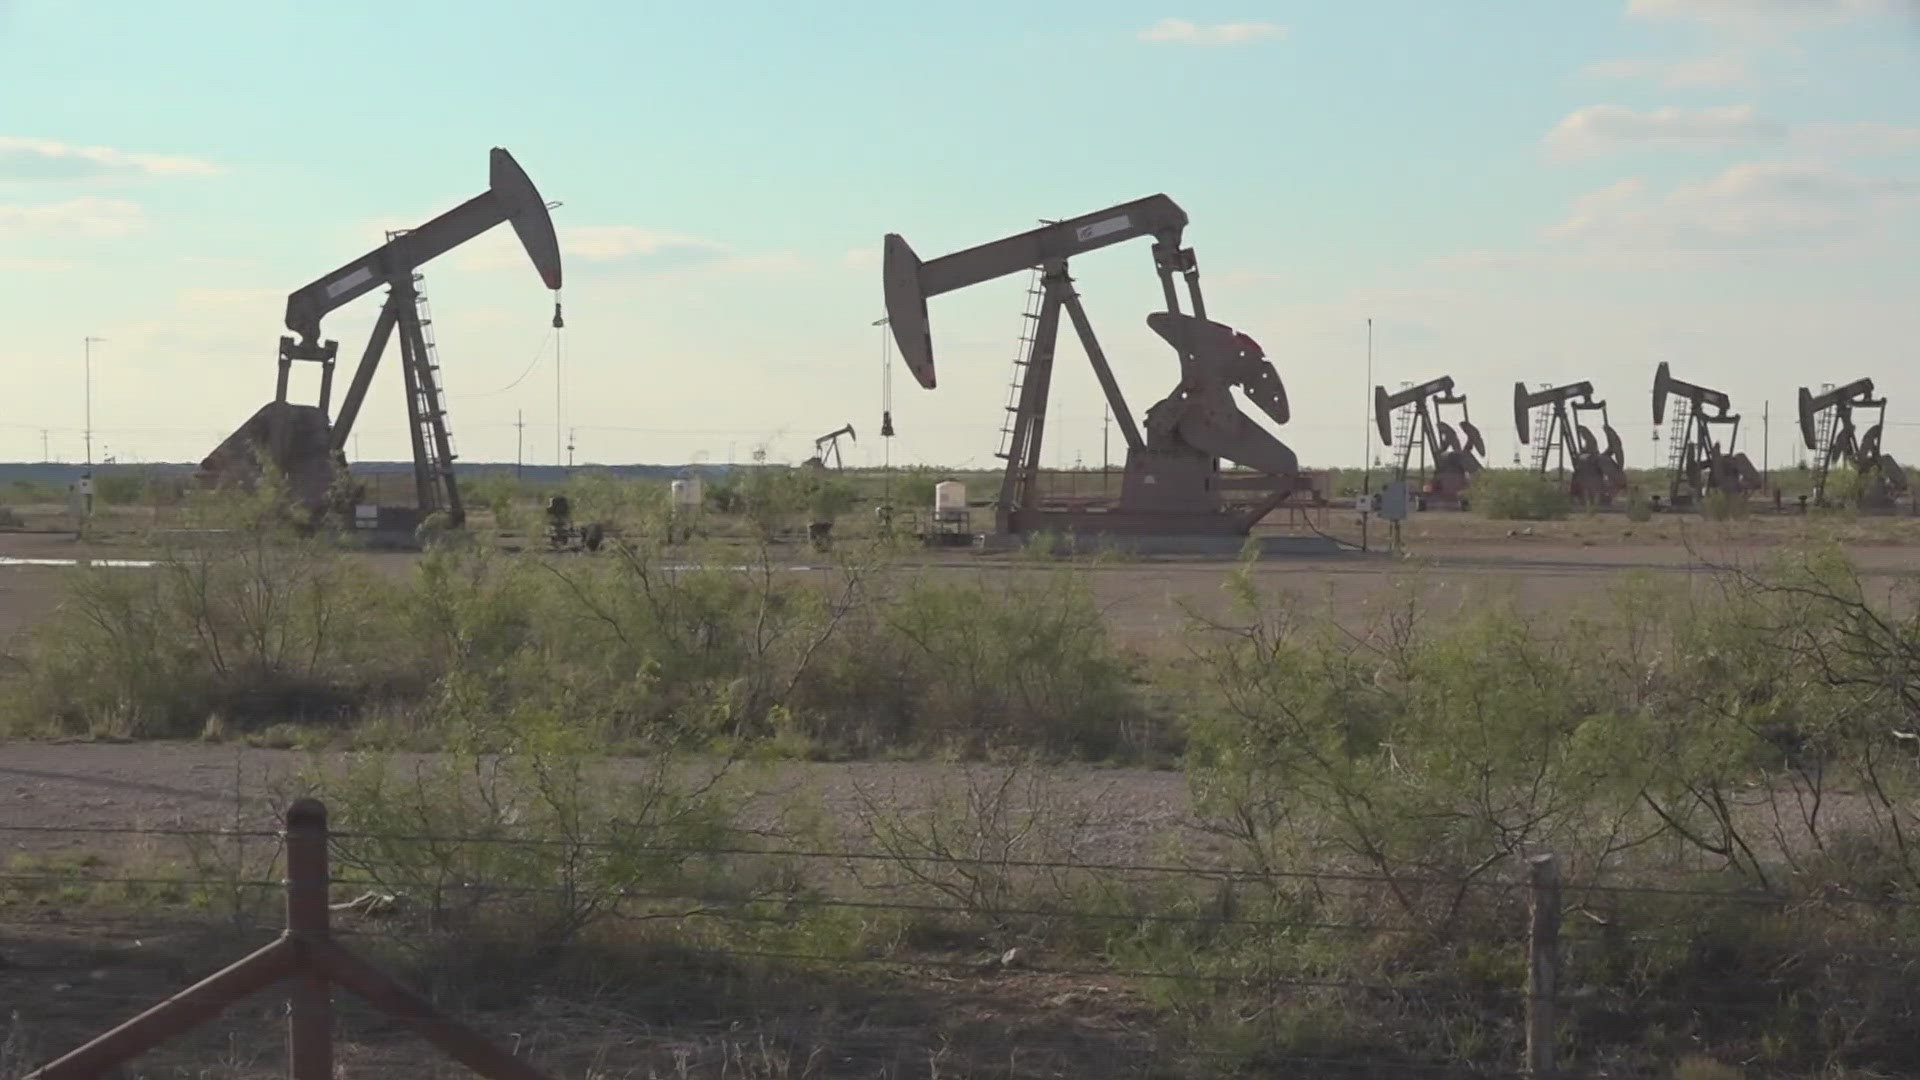 The Permian Basin is still producing around six million barrels of oil per day and around 24 billion cubic feet of natural gas.